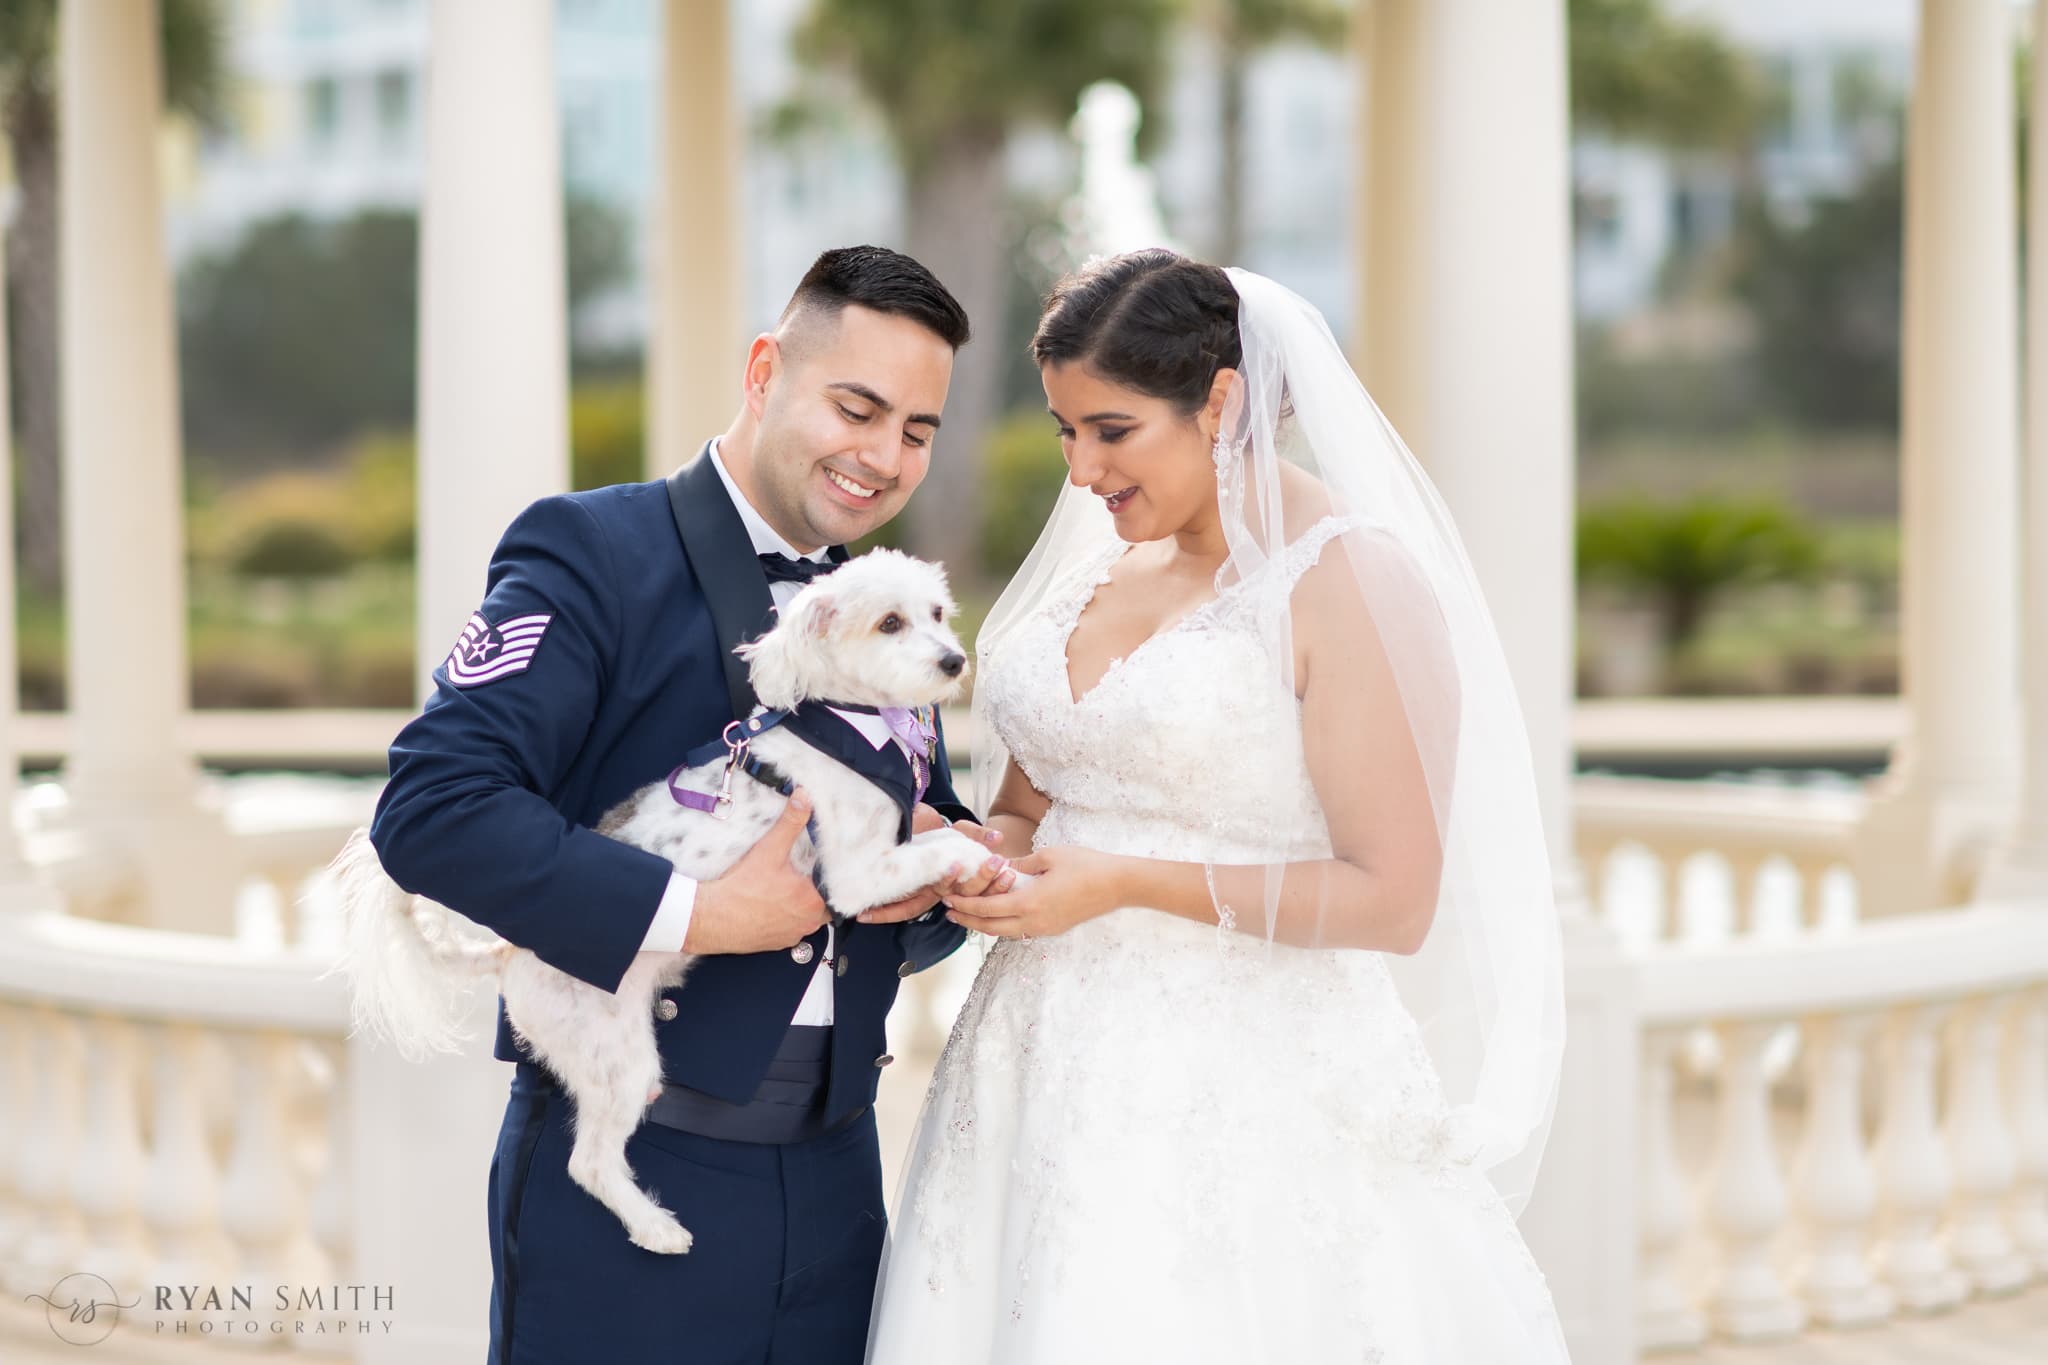 Bride and groom with their three leg doggie ring bearer  - 21 Main Events at North Beach